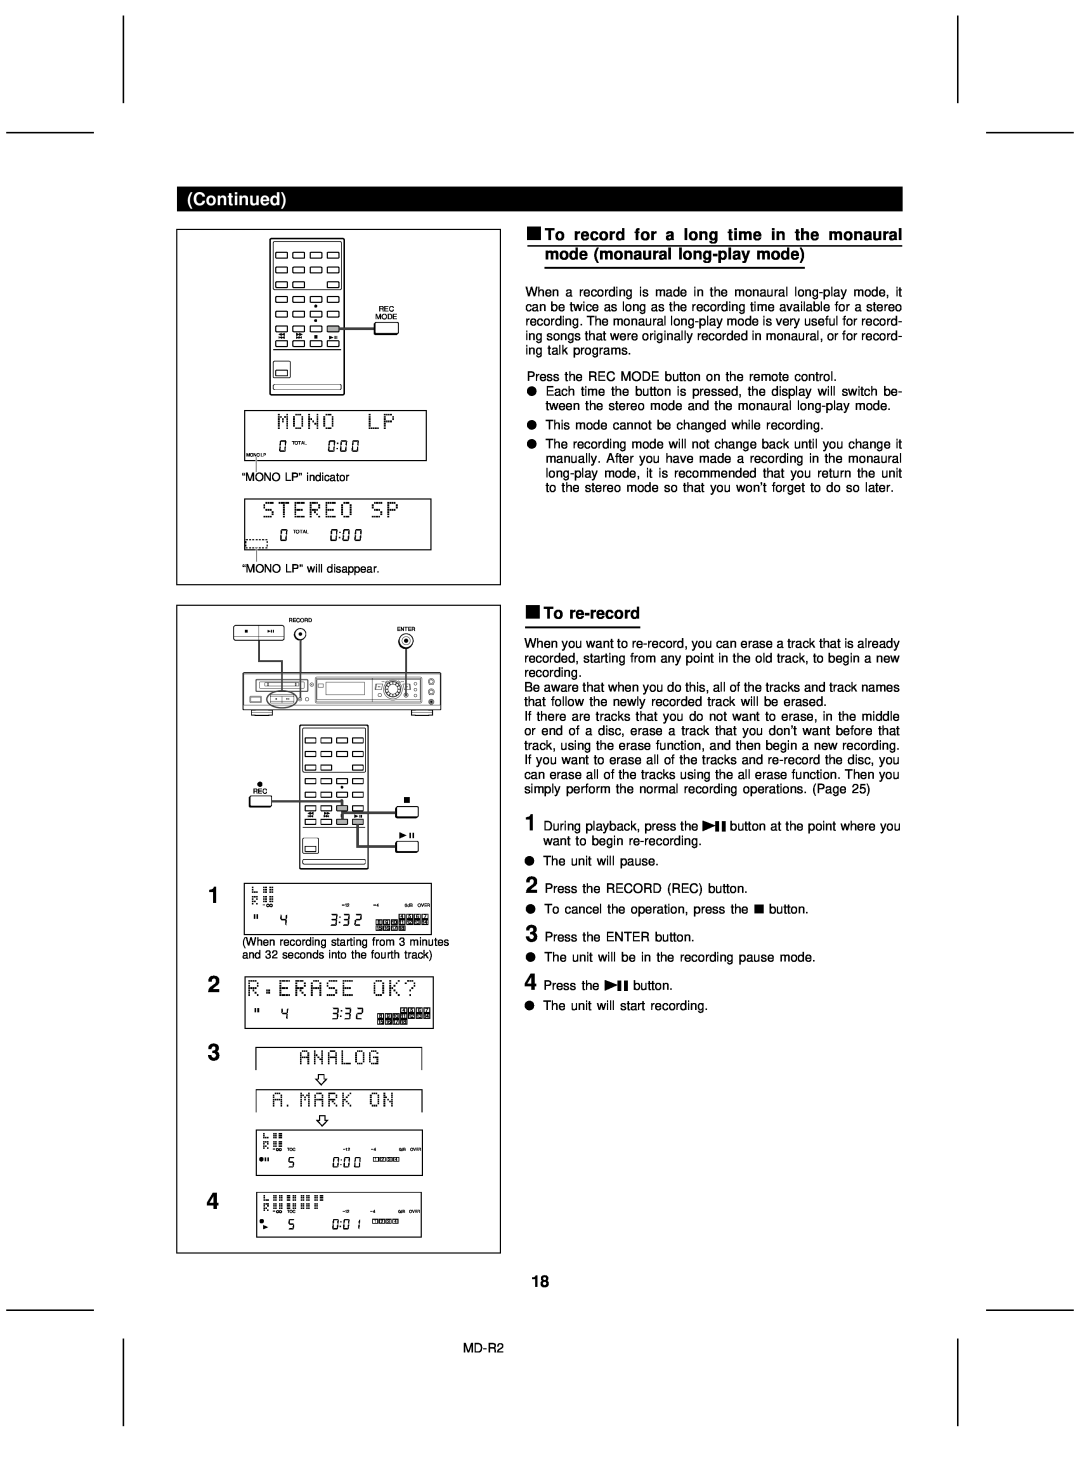 Kenwood MD-R2 operation manual To re-record, Continued 